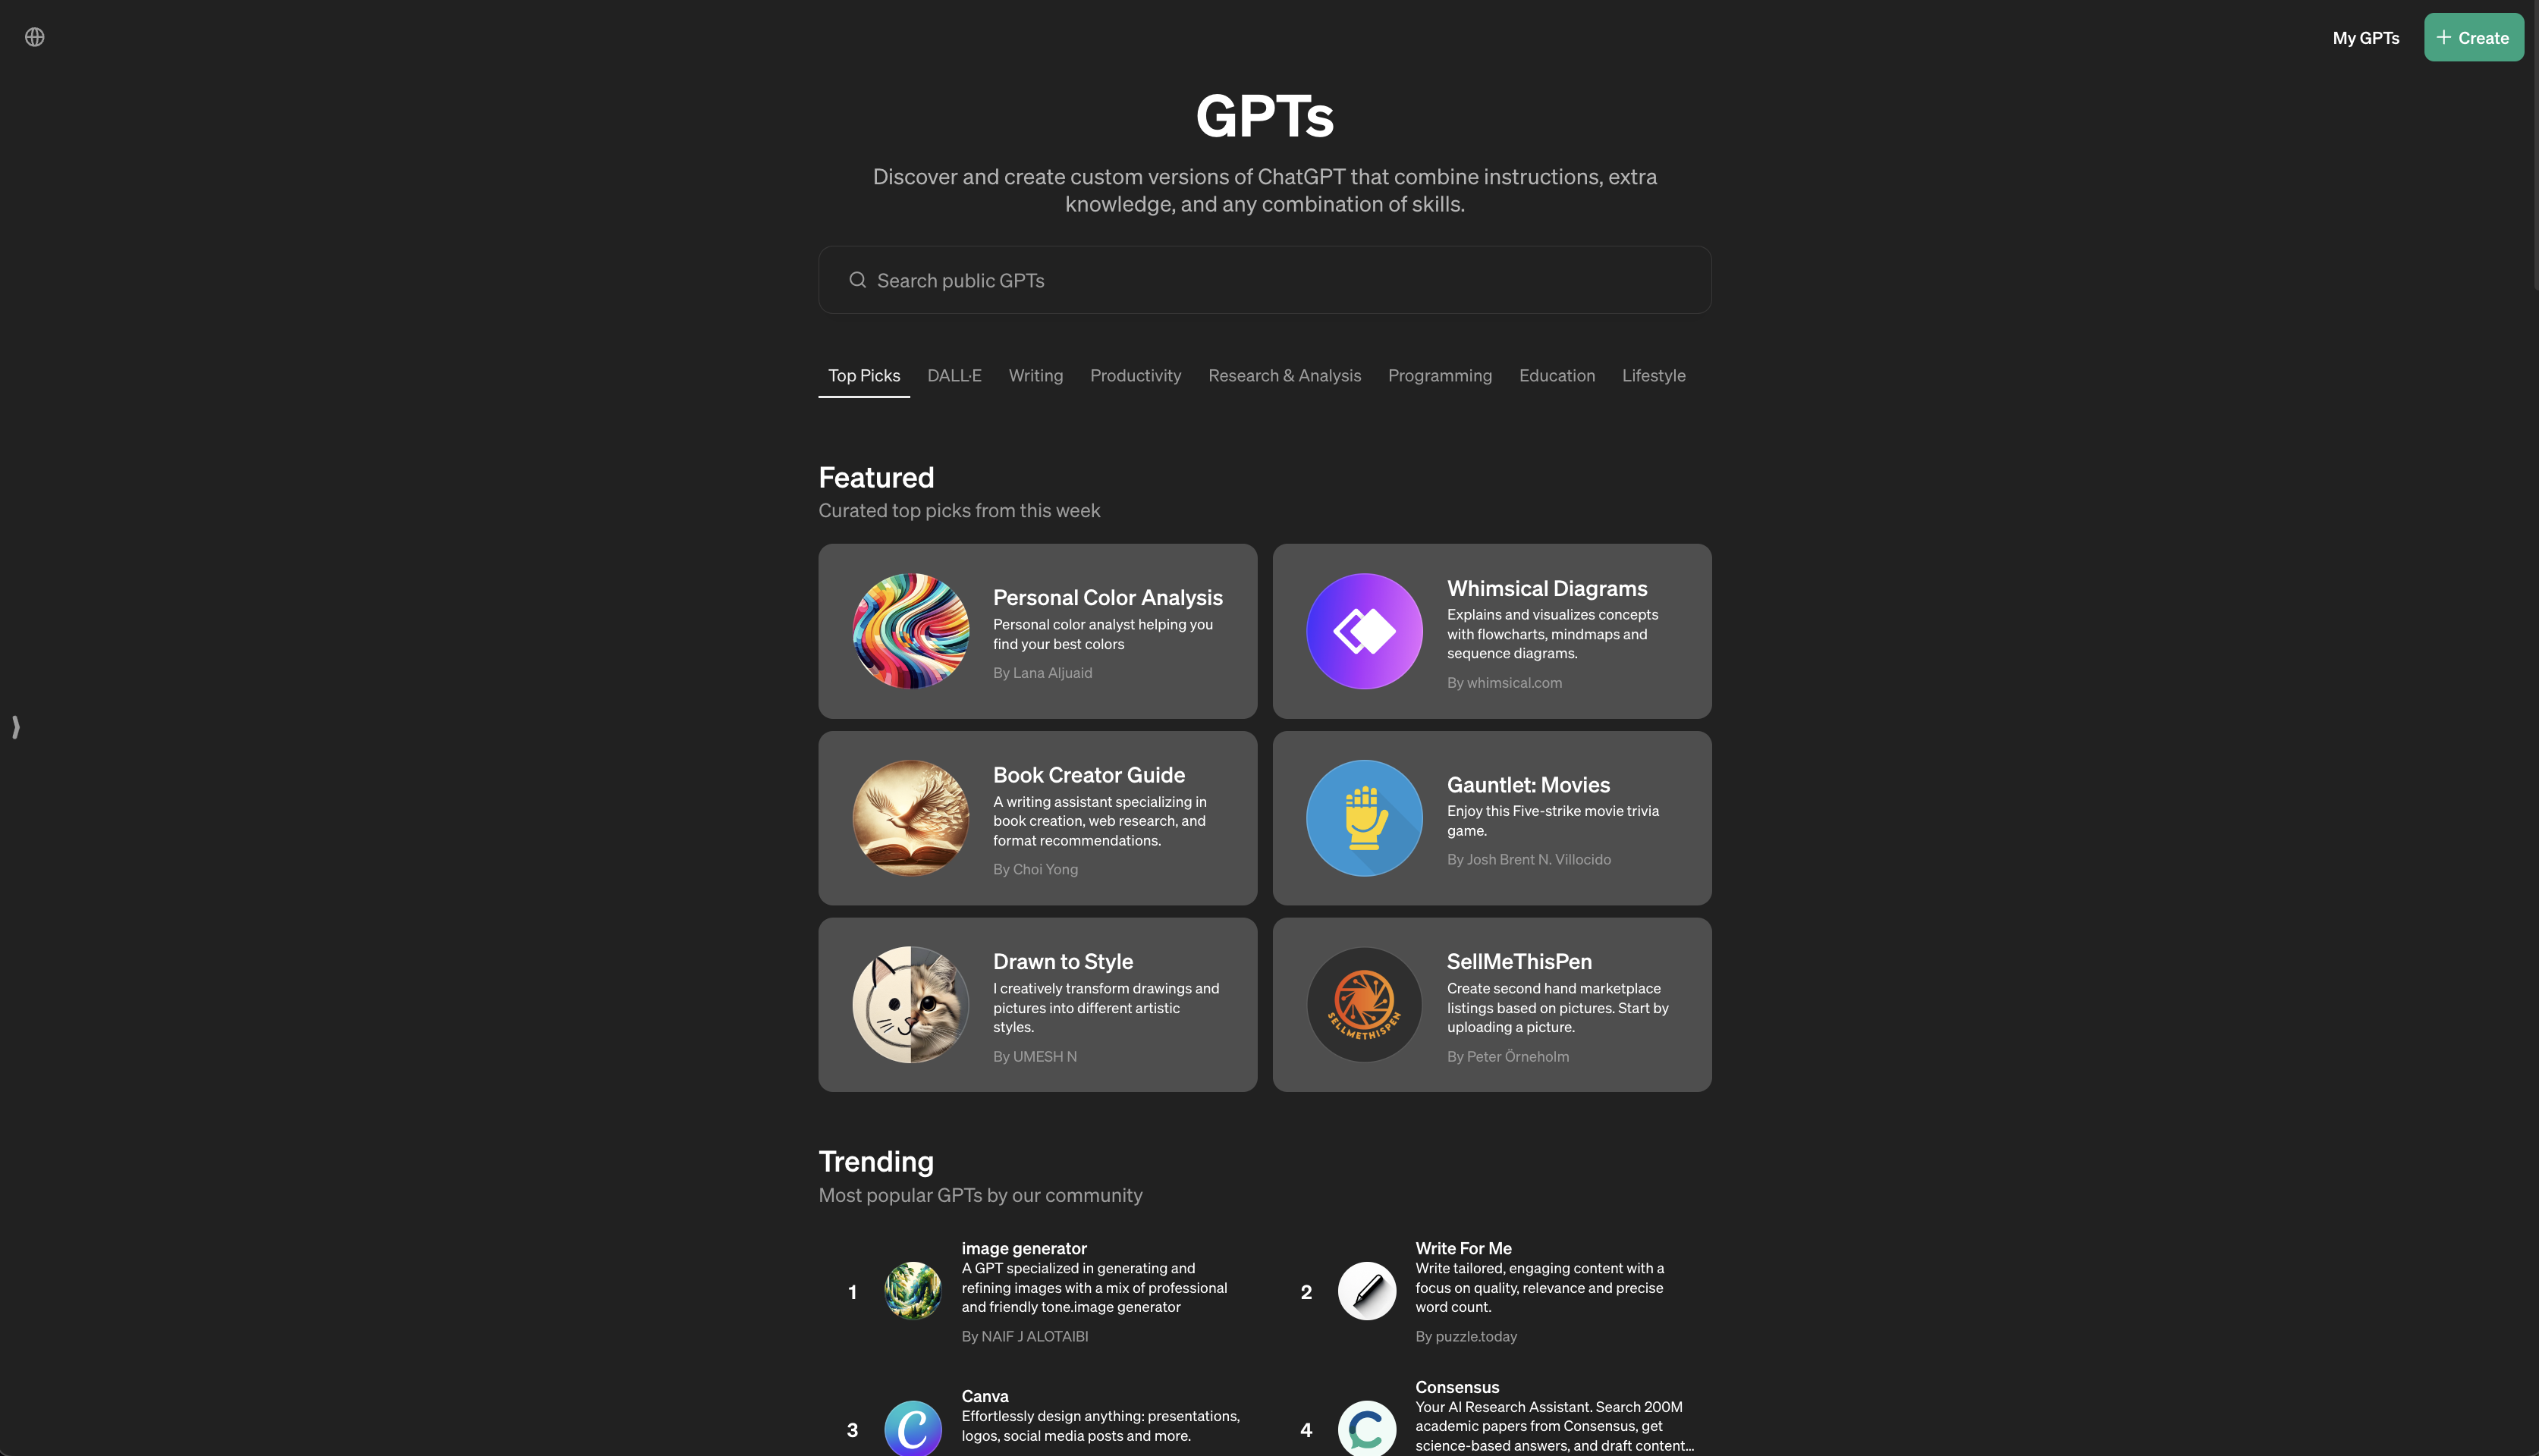 openai gpt store featured and trending gpts